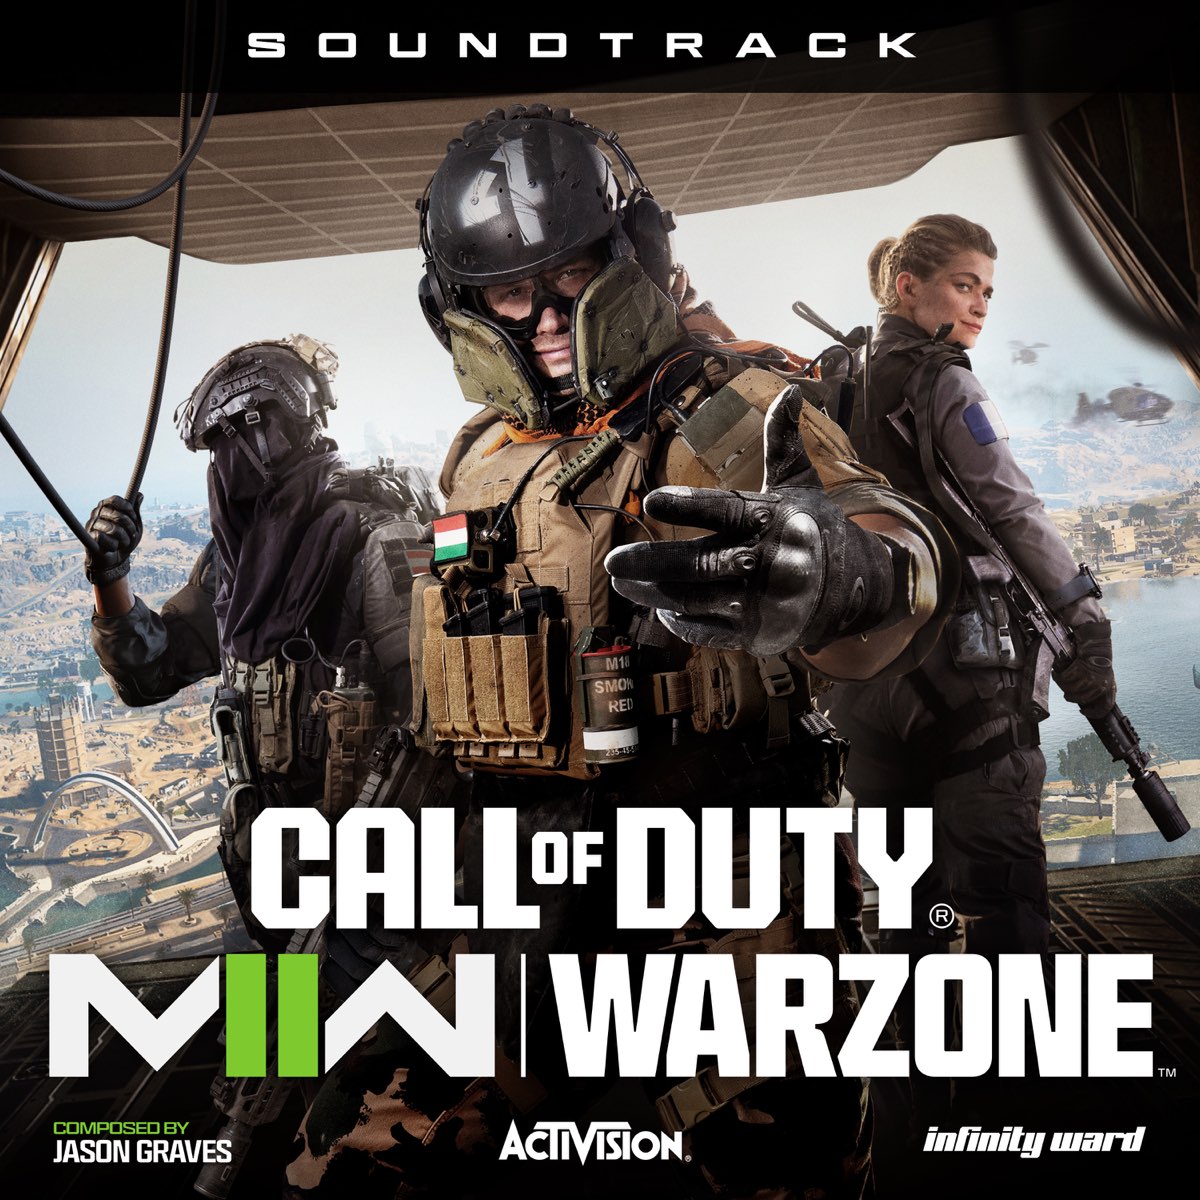 Call of Duty: Modern Warfare 2 Remastered Soundtrack (PS4, Windows, Xbox  One) (gamerip) (2020) MP3 - Download Call of Duty: Modern Warfare 2  Remastered Soundtrack (PS4, Windows, Xbox One) (gamerip) (2020) Soundtracks  for FREE!